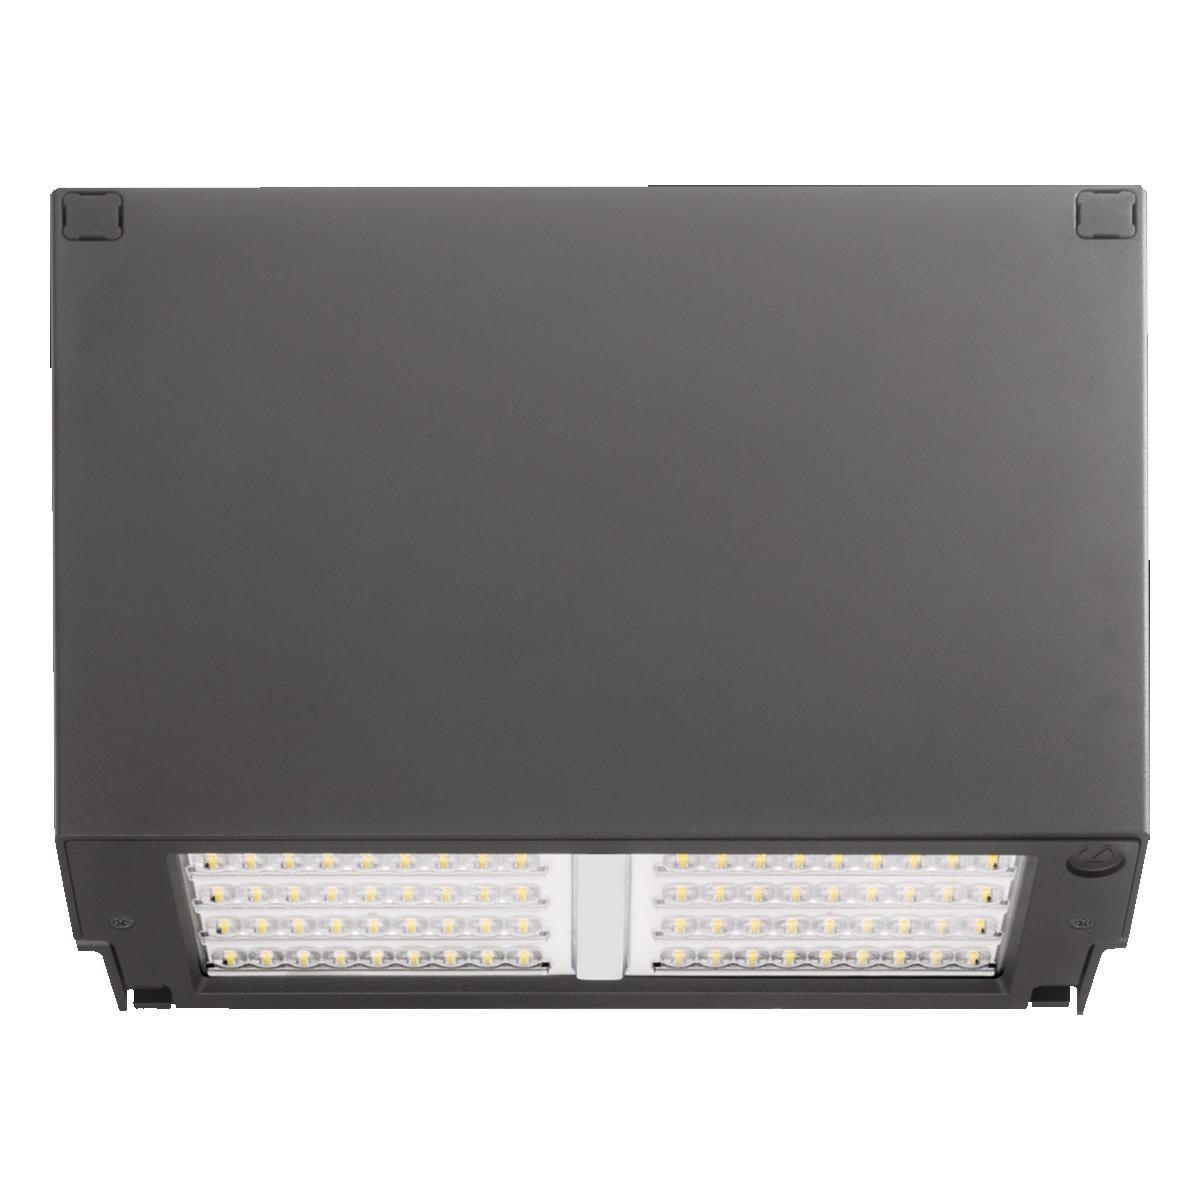 LED Wall Pack Light, Full Cut-Off, 6000 Lumens, 250W MH Replacement, 5000K, 120-277V - Bees Lighting